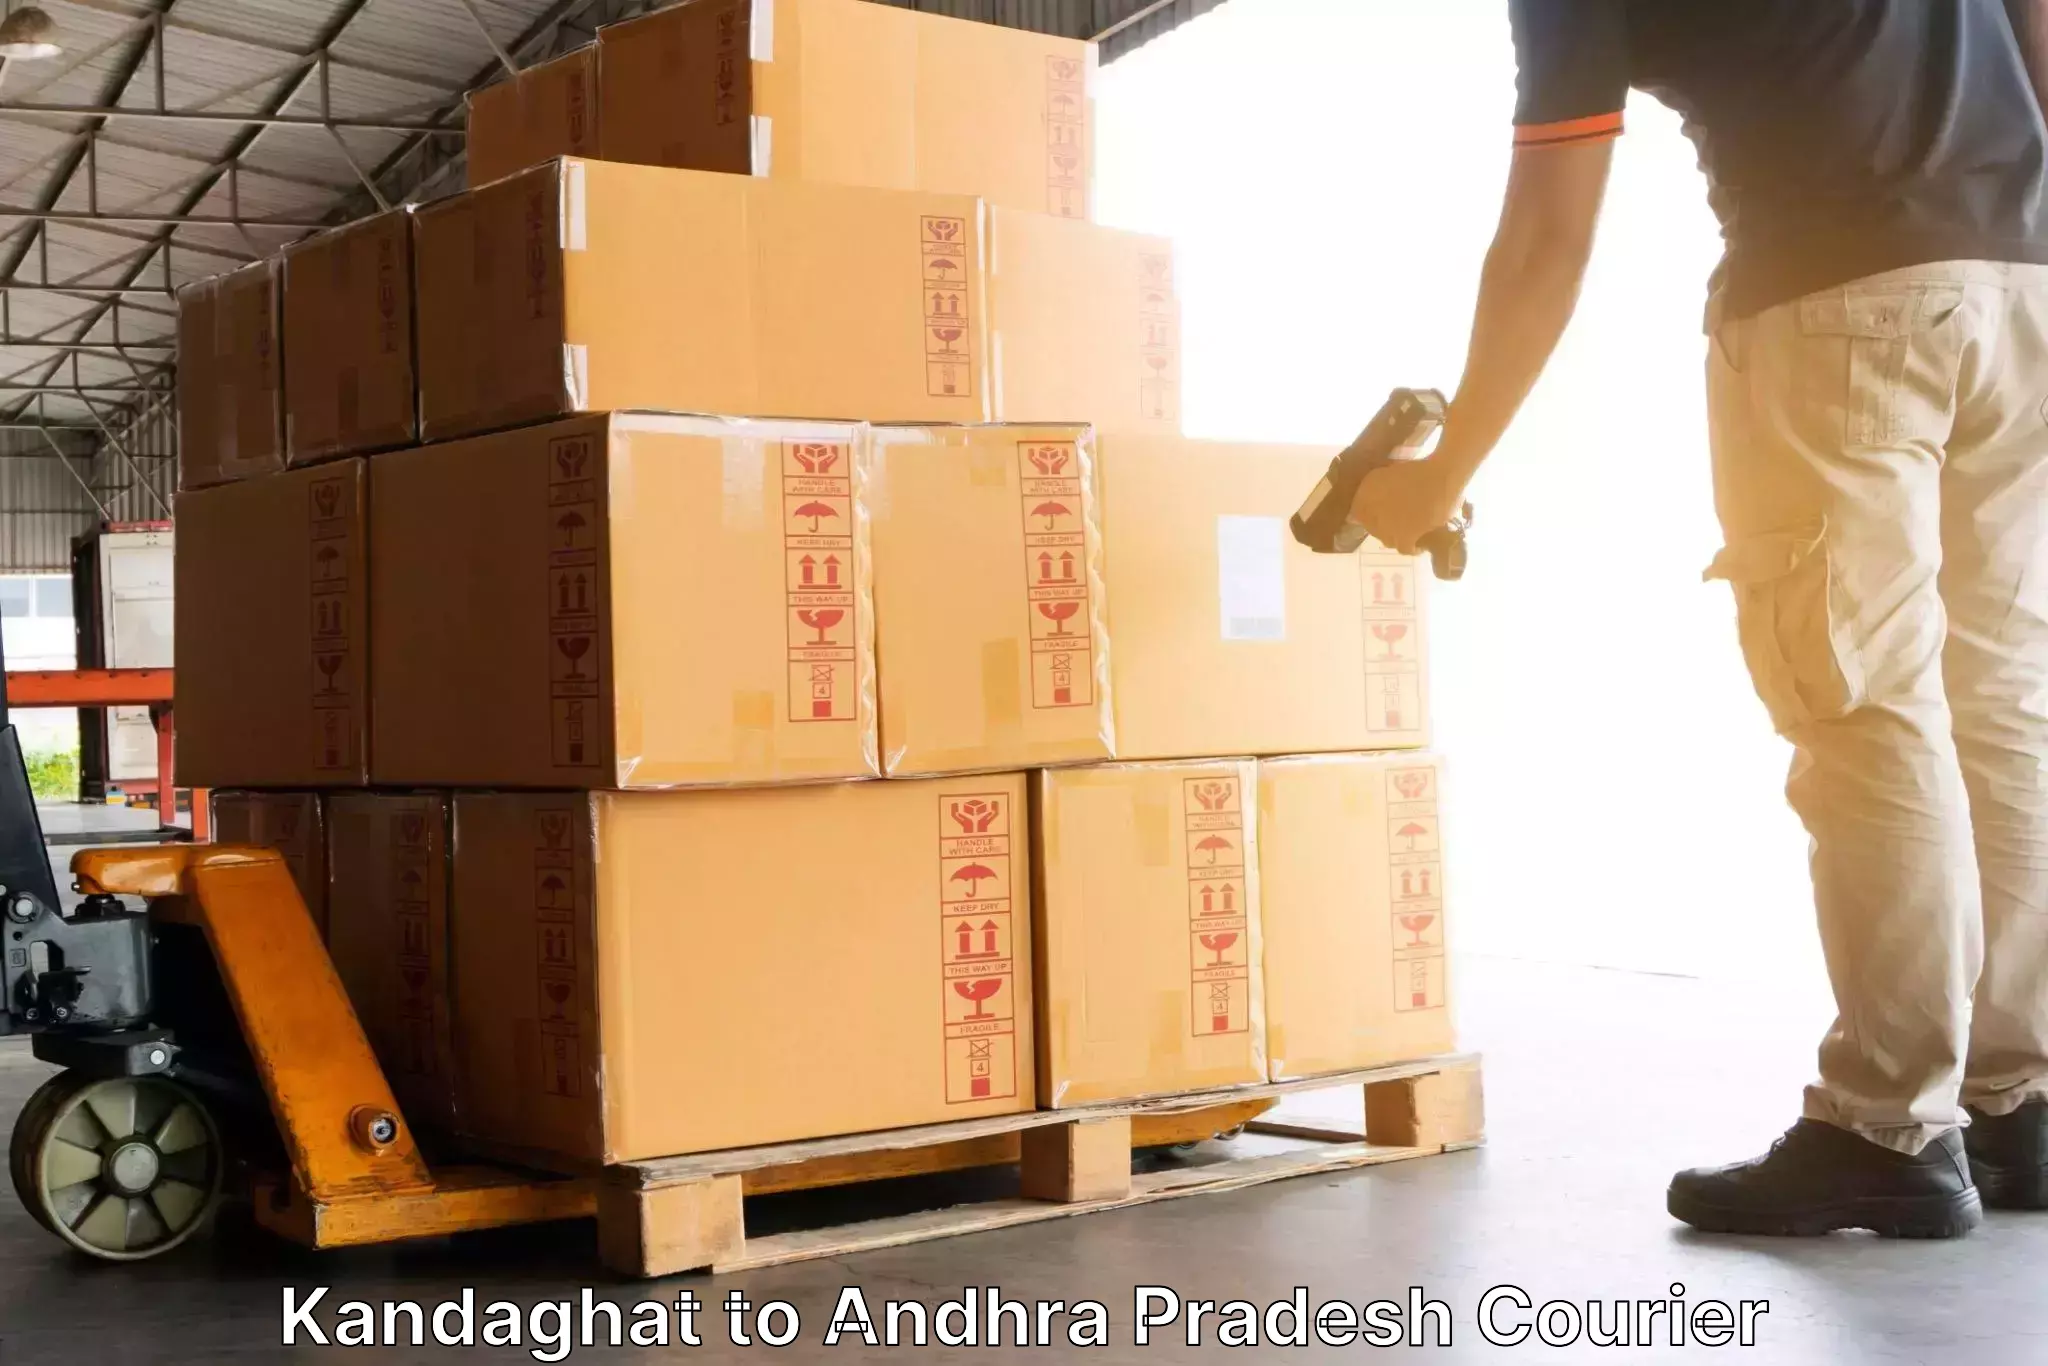 High-quality delivery services Kandaghat to Visakhapatnam Port